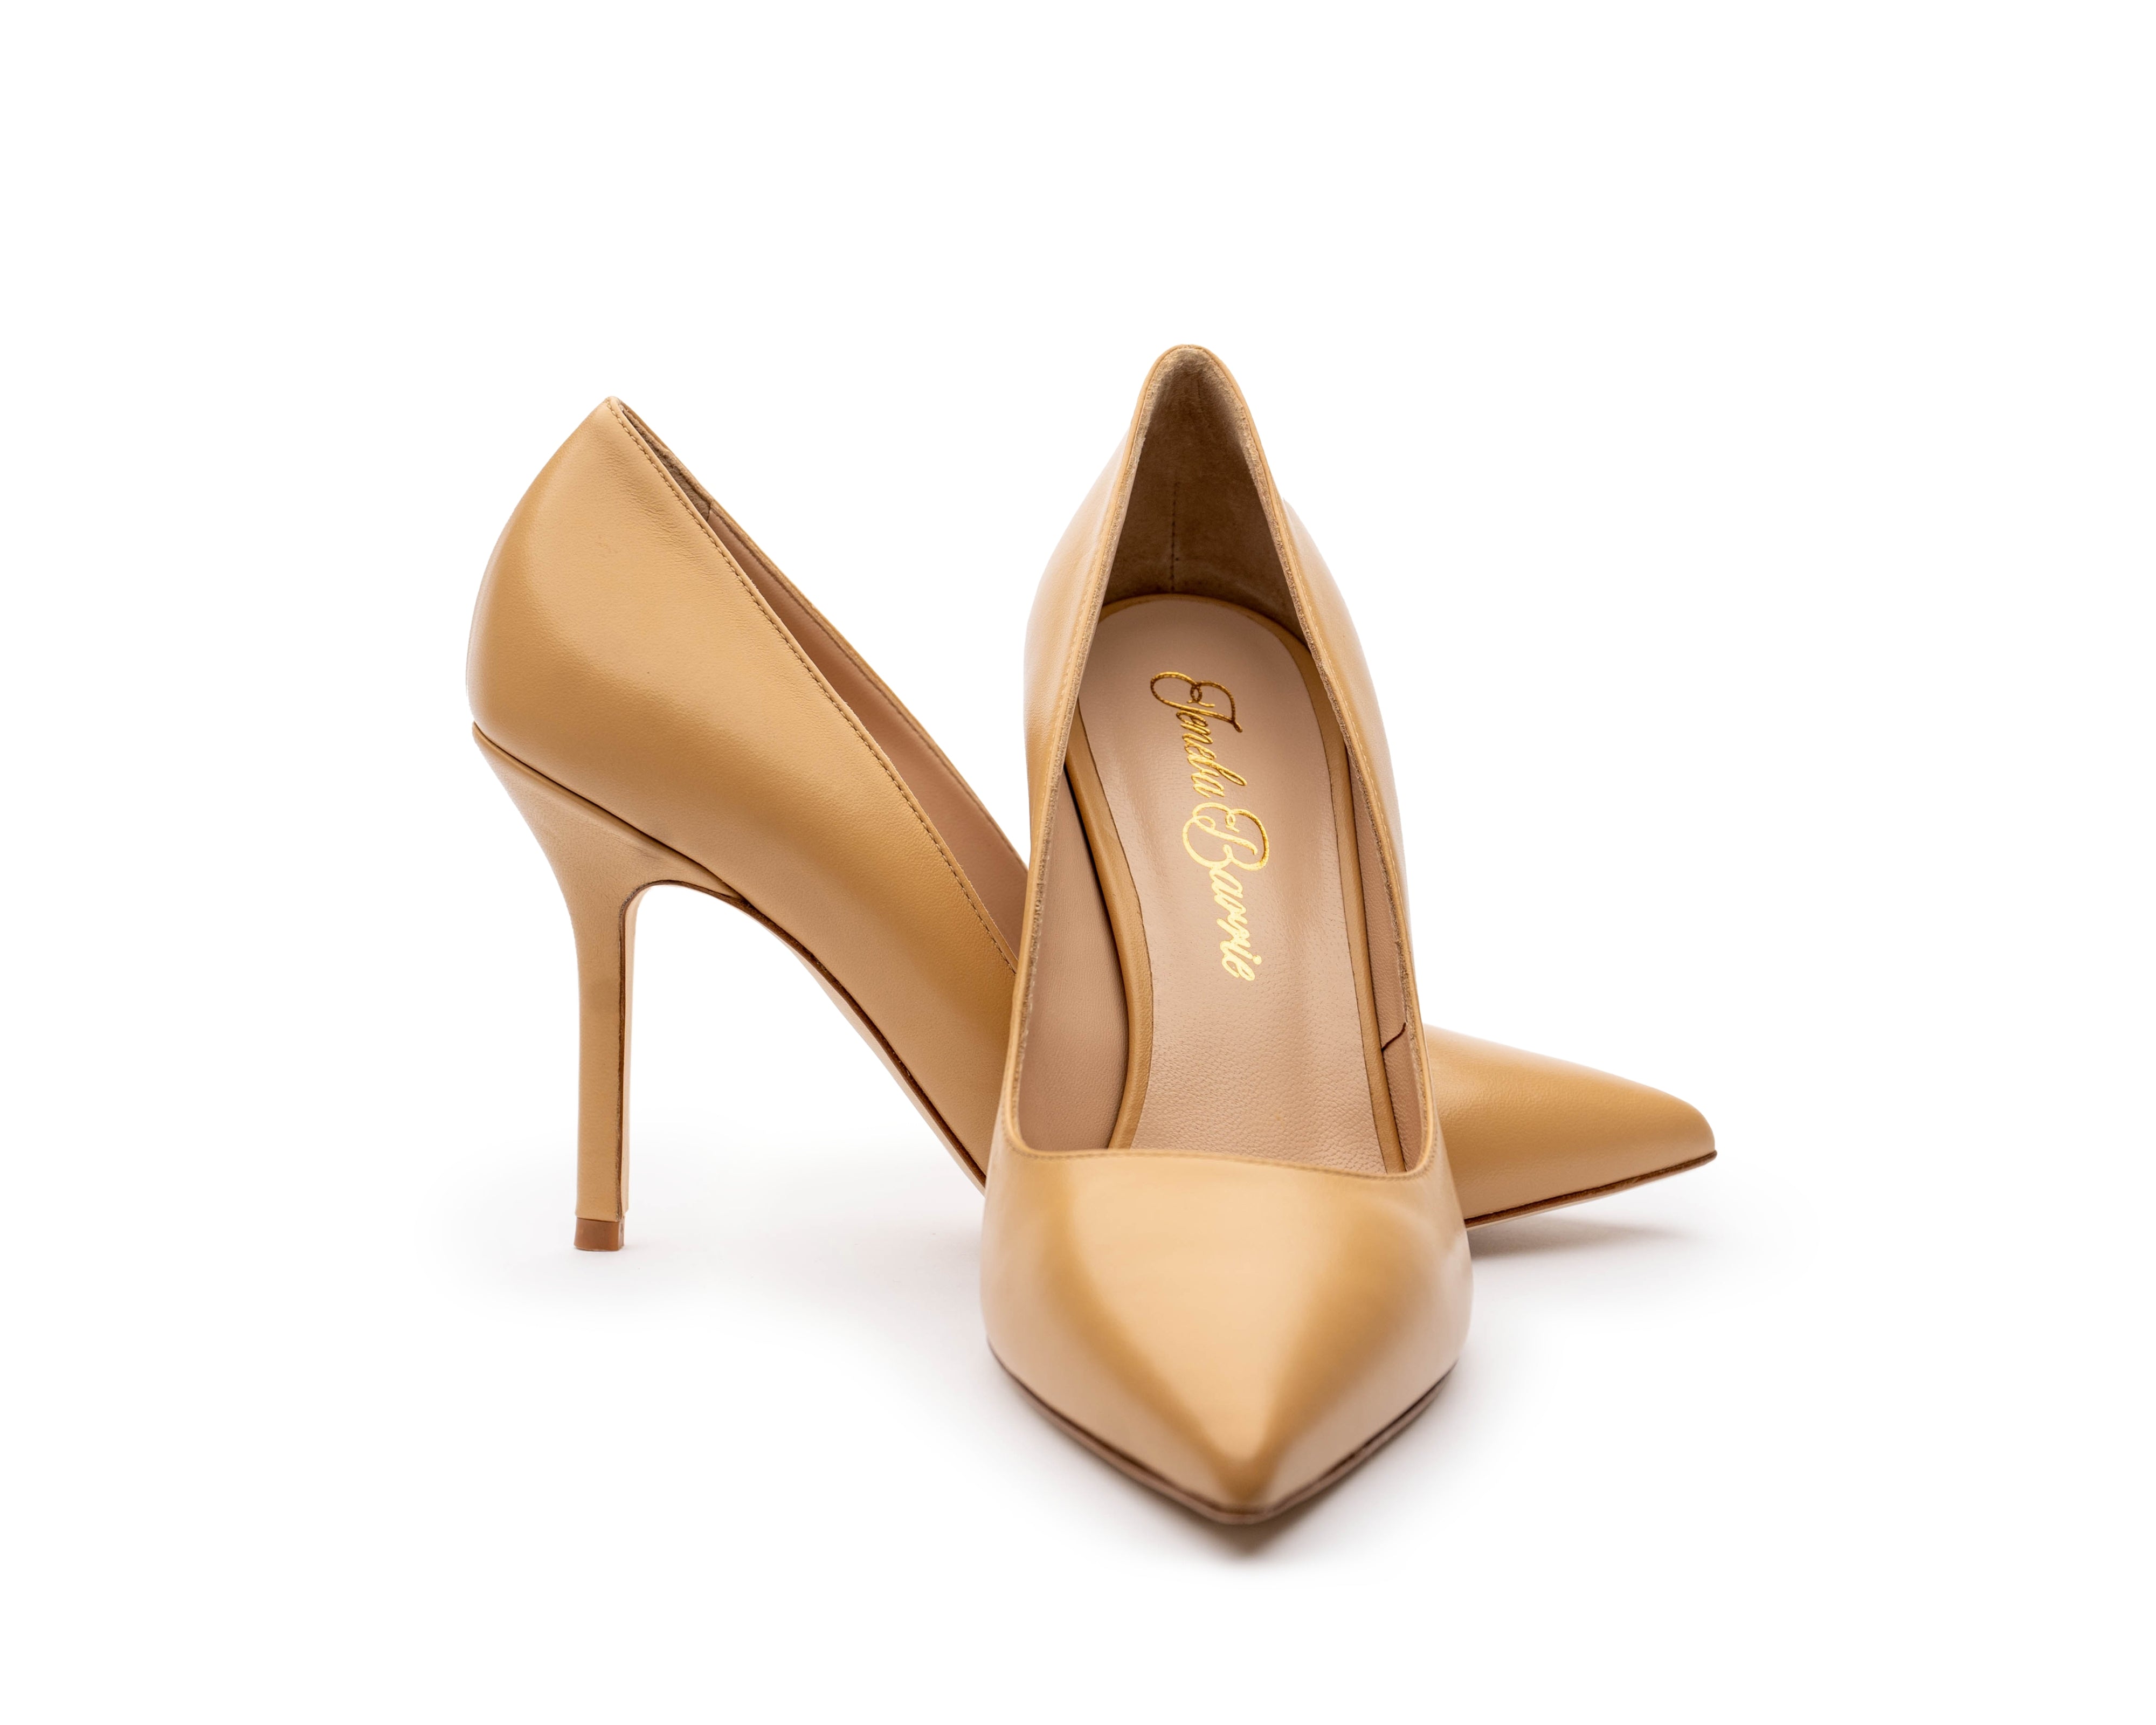 You can now buy nude shoes for every skin tone